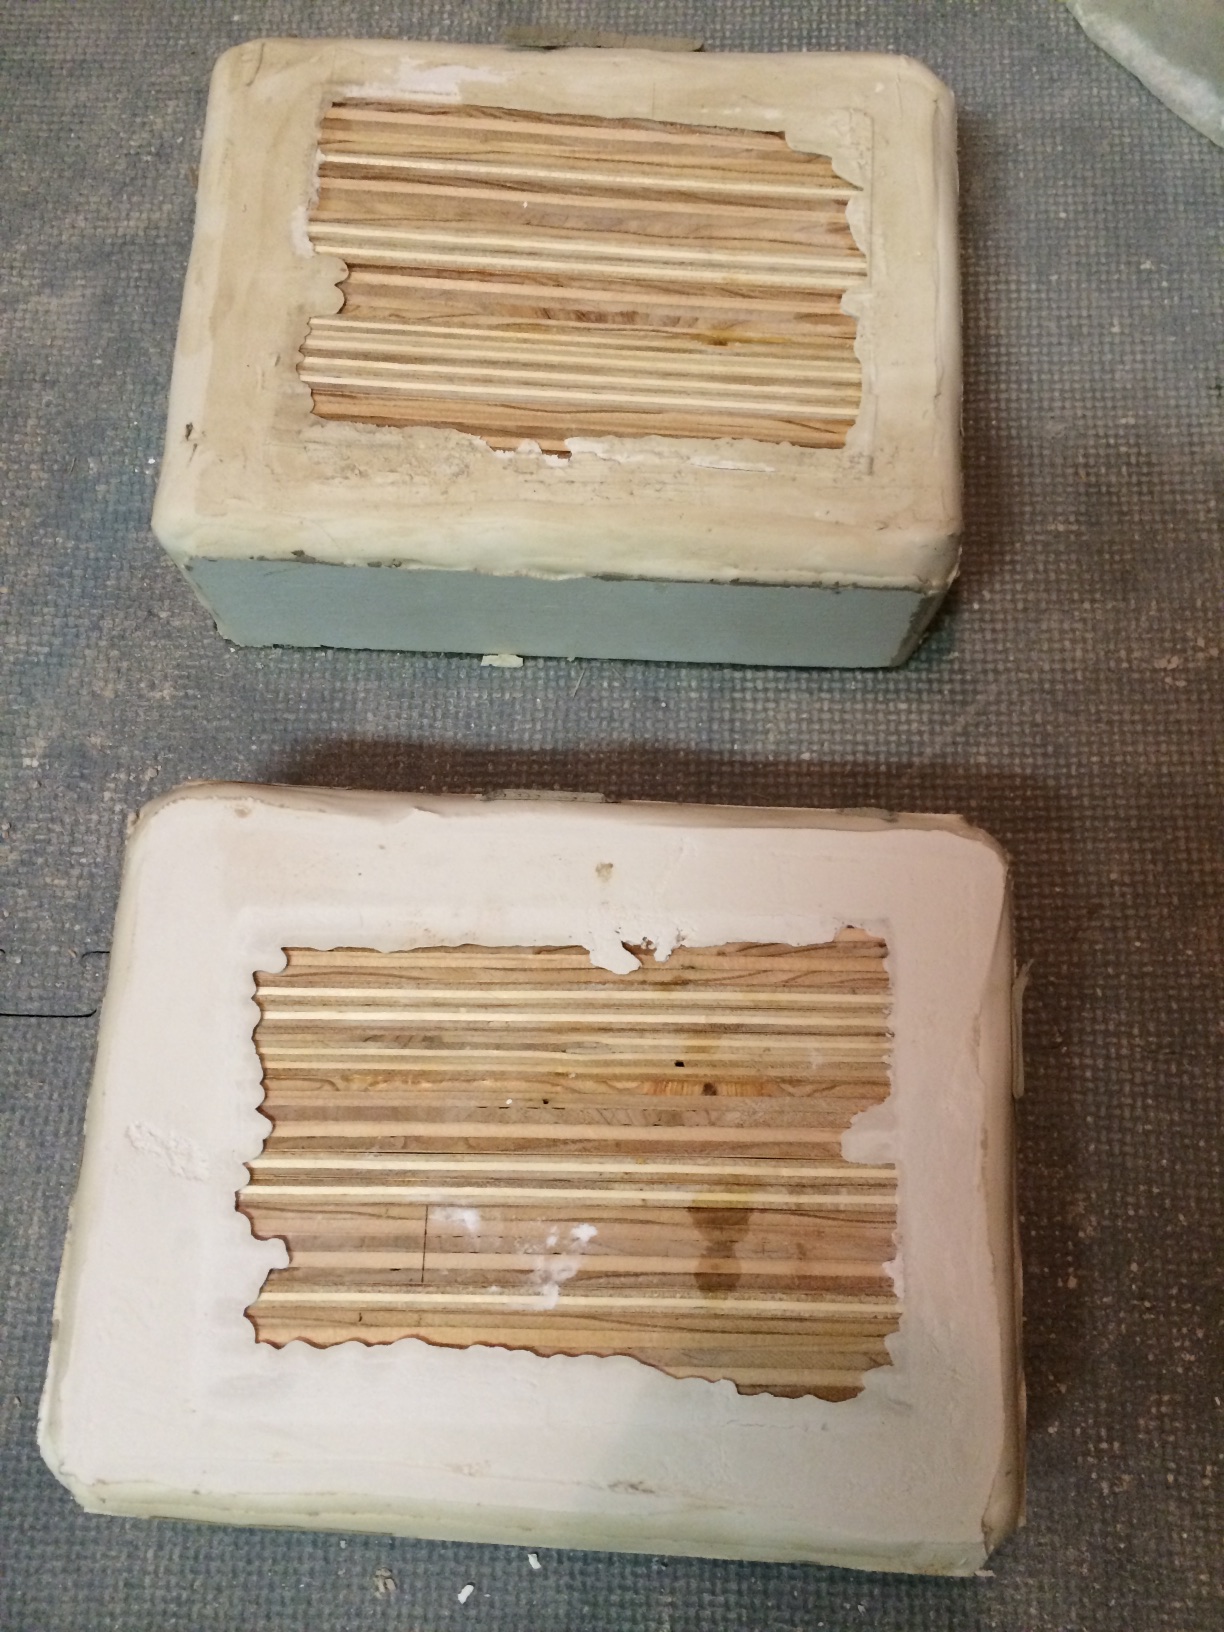  Two molds with the wooden positives still in them. Turns out it was not easy to get the positives out... 